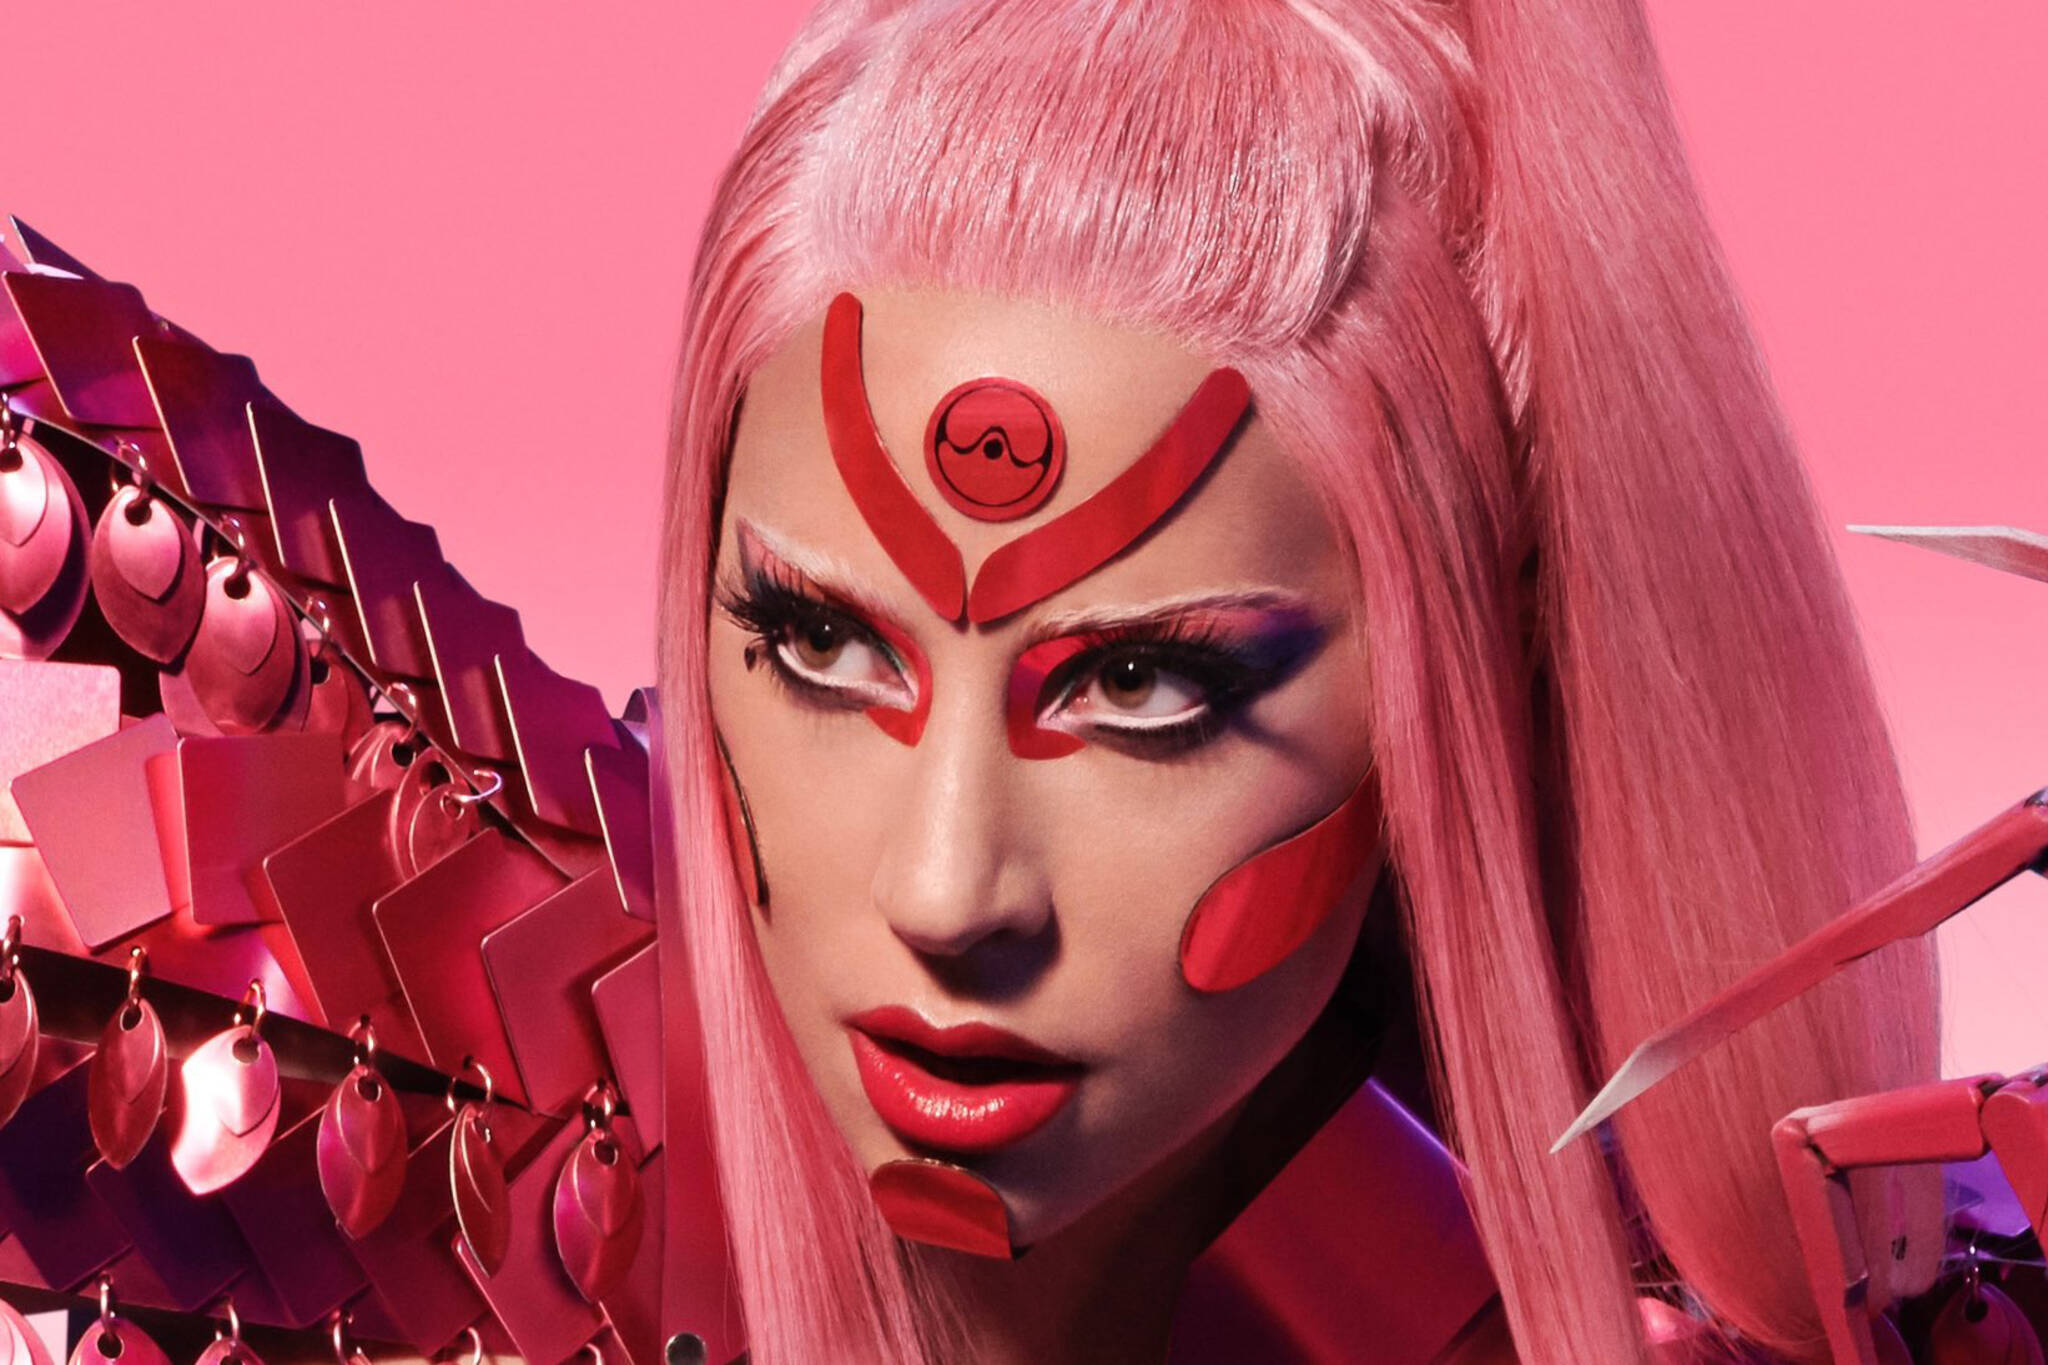 Lady Gaga is coming to Toronto this summer with her Chromatica Ball tour